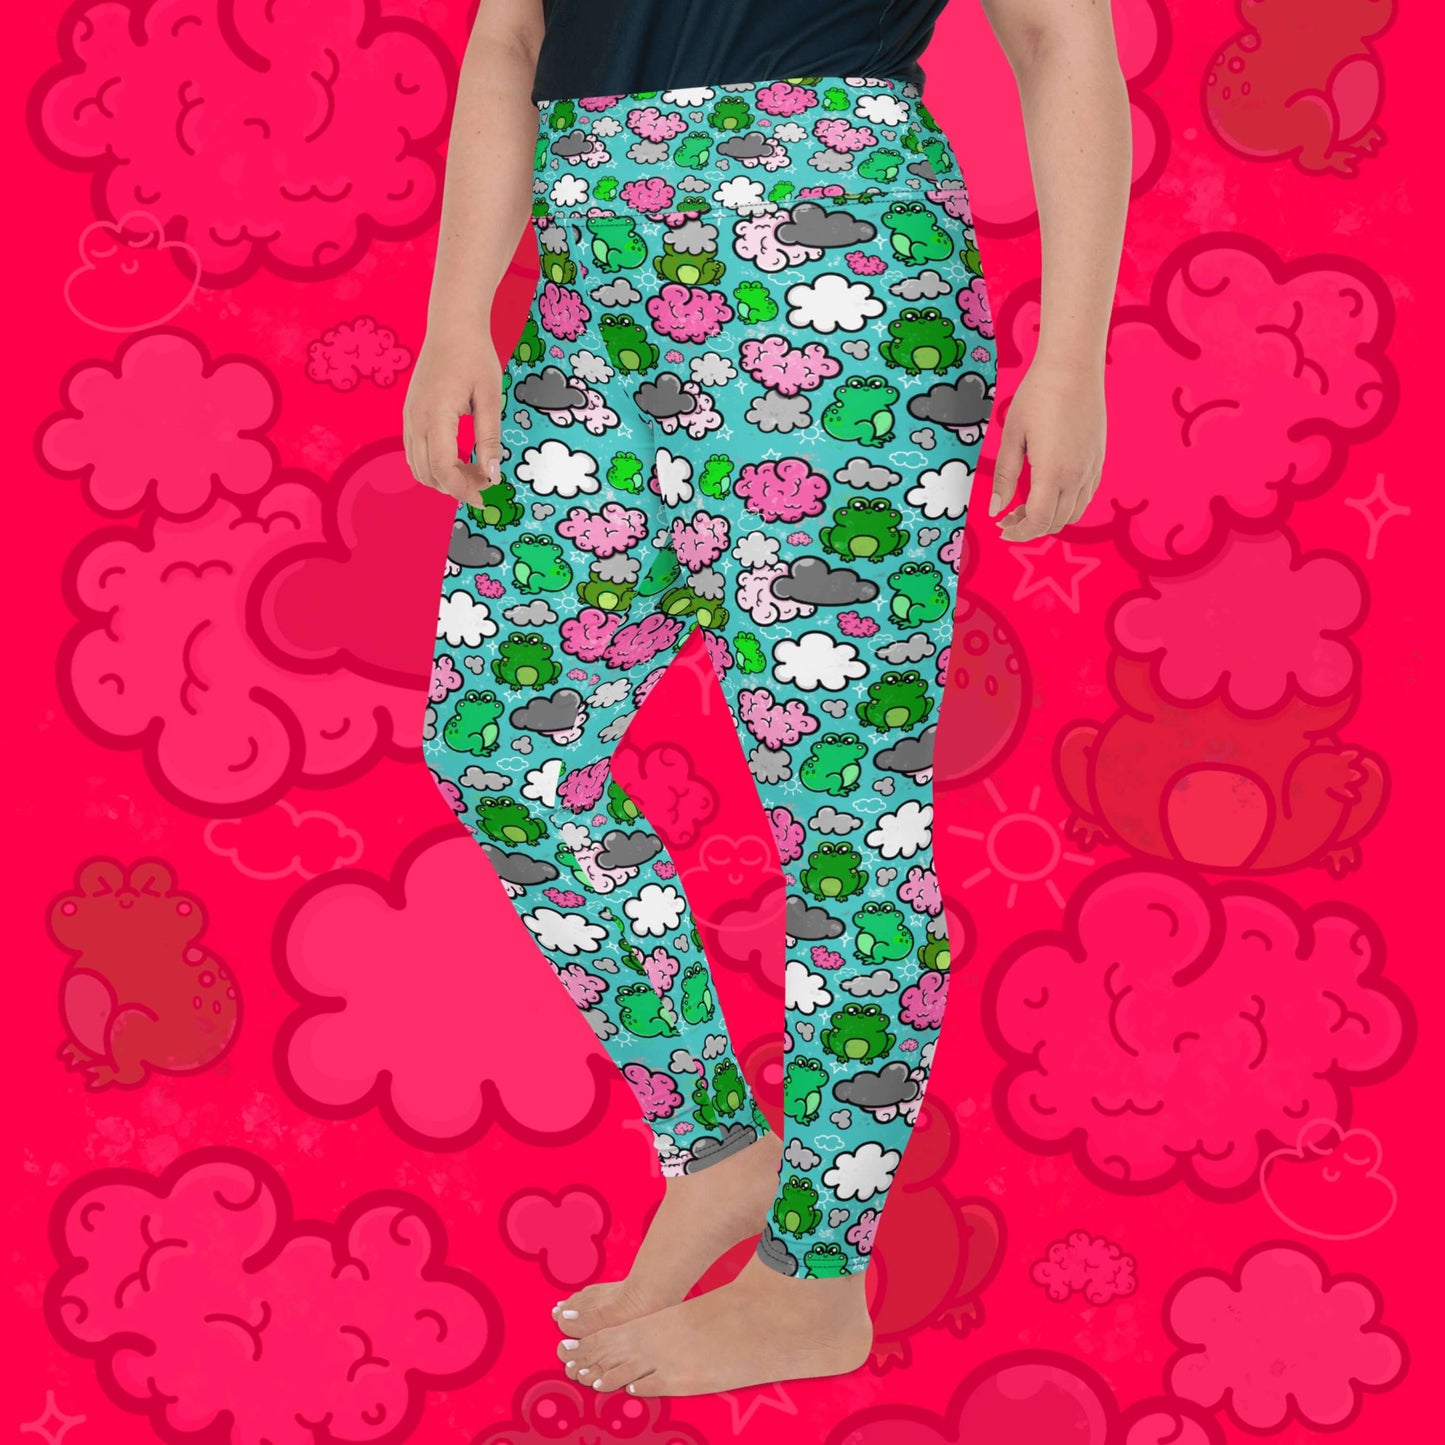 The Brain Frog Plus Size Leggings - Brain Fog being worn by a model facing left with their left leg bent on a red background with a faded brain frog print, the photo is cropped from the hips down. The leggings are an aqua blue base with various green kawaii face frogs with pink blush cheeks, pink brain style clouds, white and grey clouds and white sparkles all over. The design was created to raise awareness of Brain Fog.